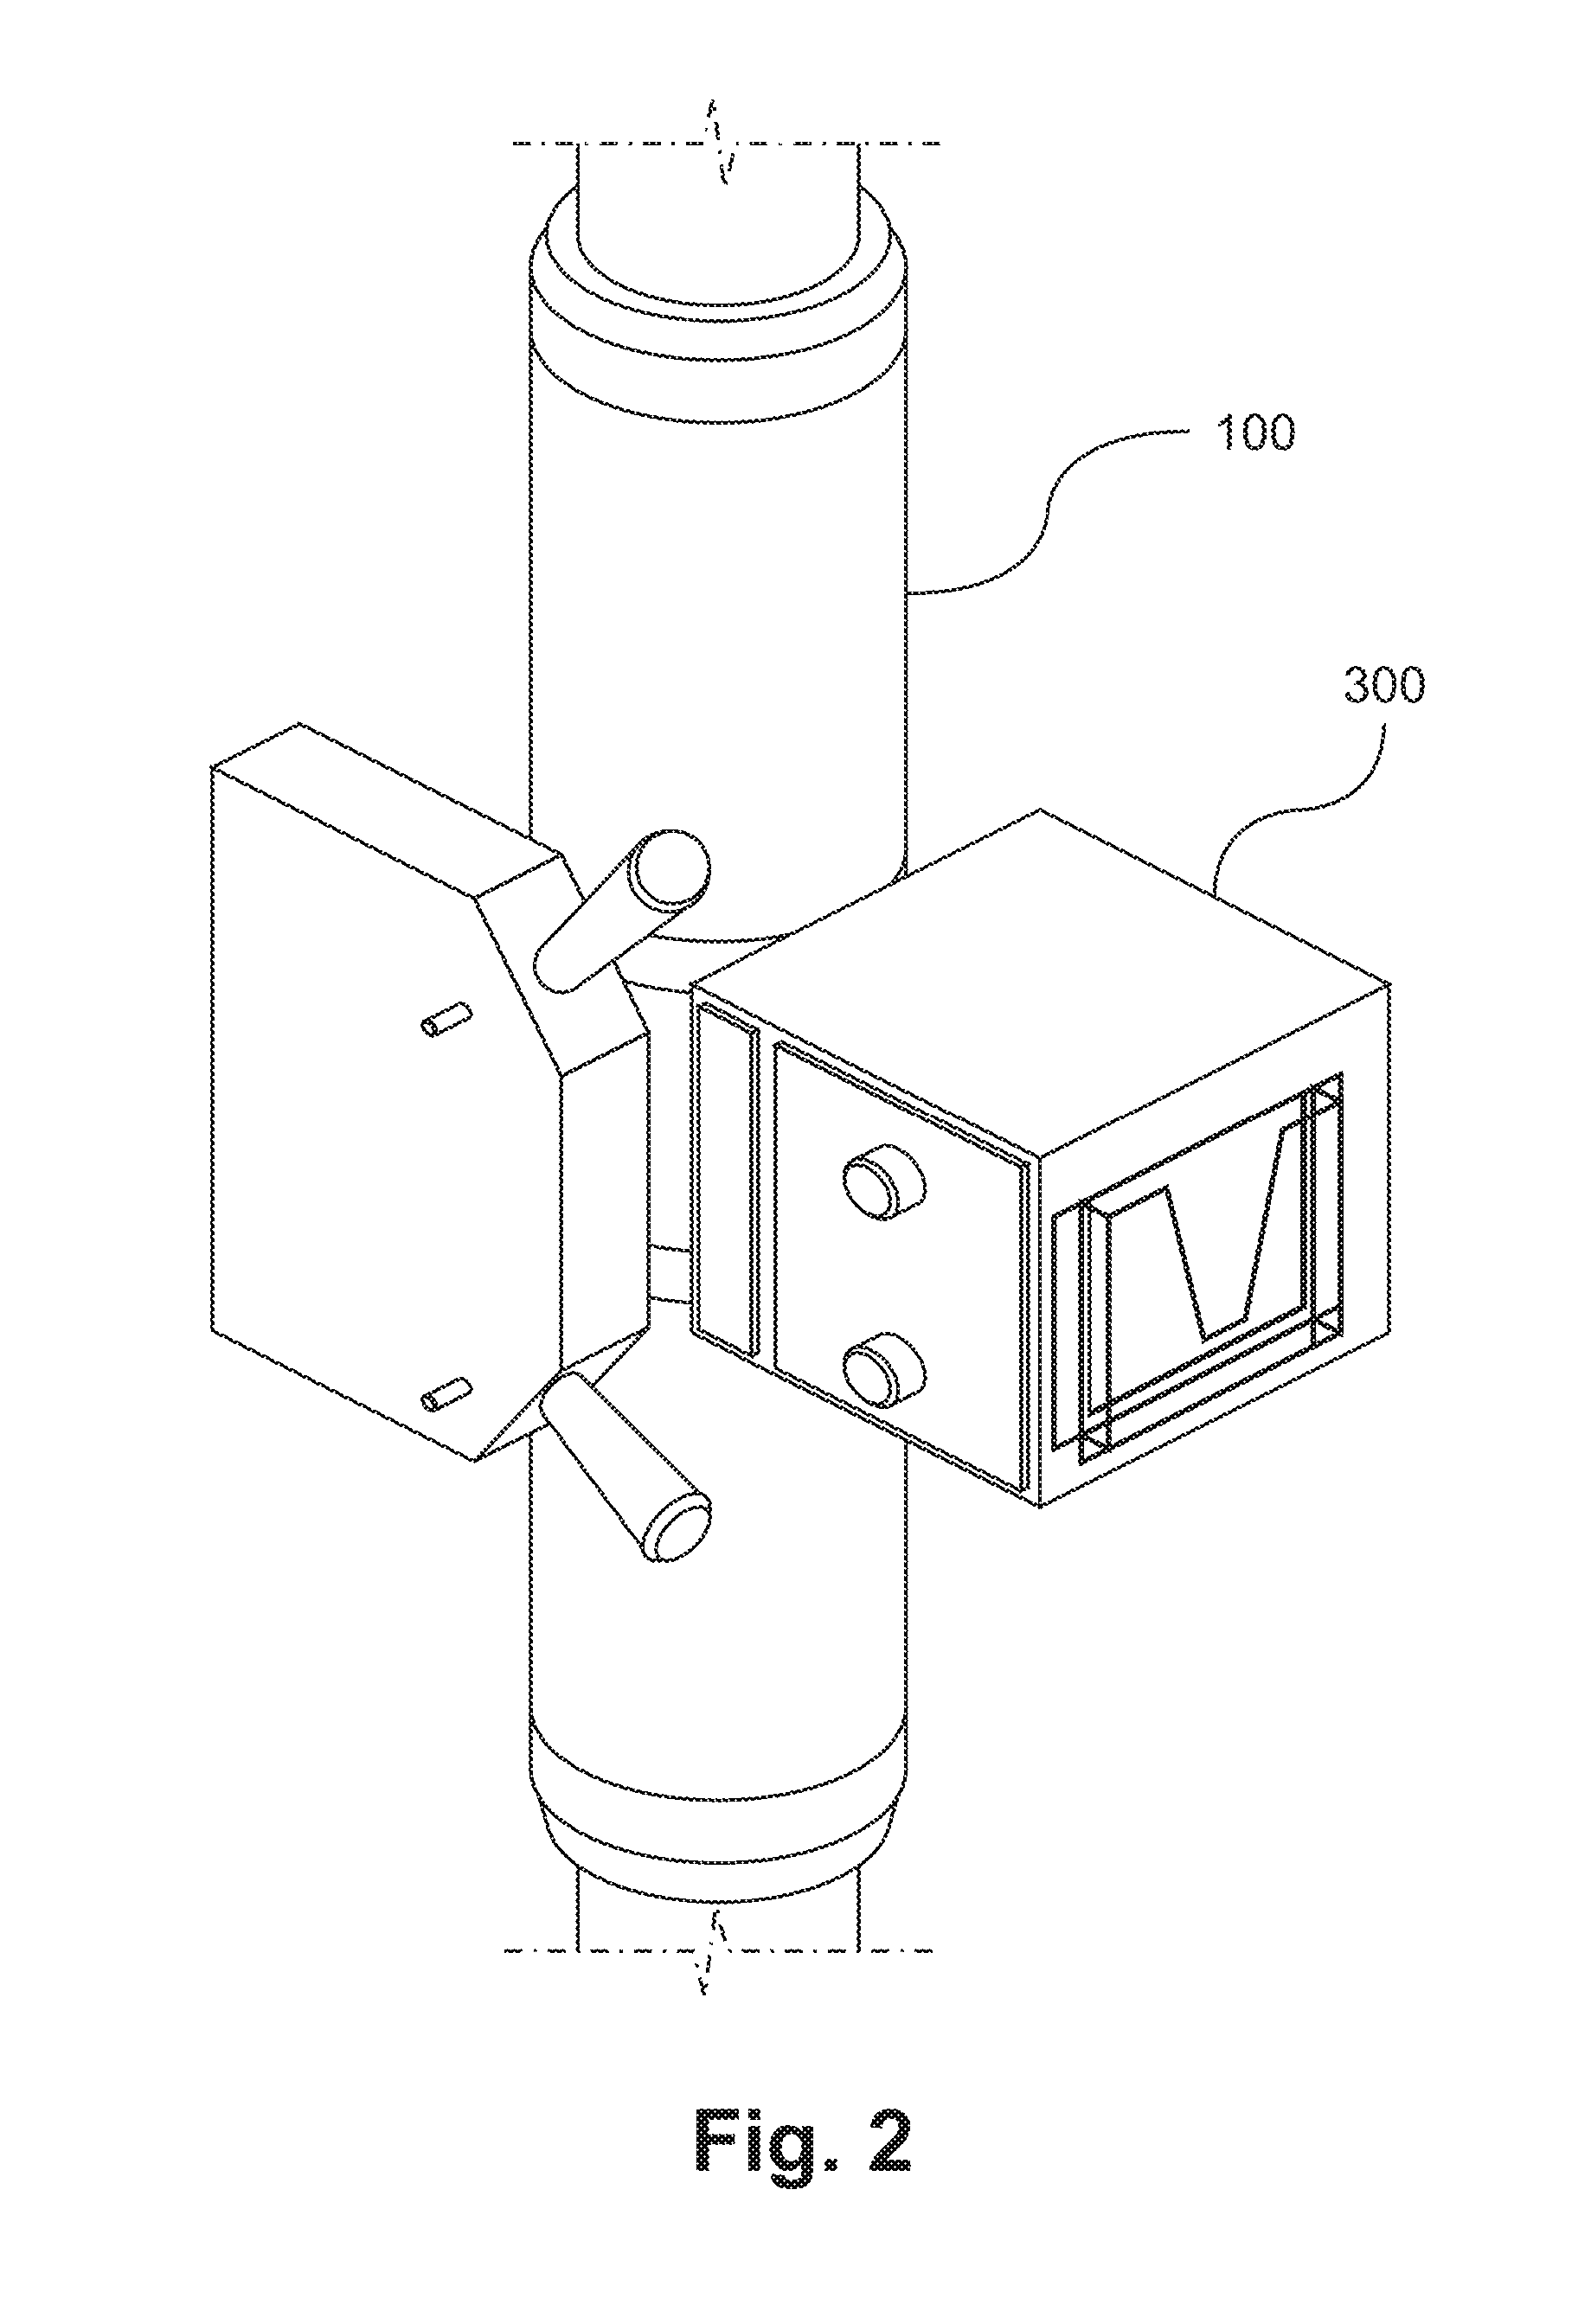 Laser guided patient positioning system for chiropractic x-rays and method of use